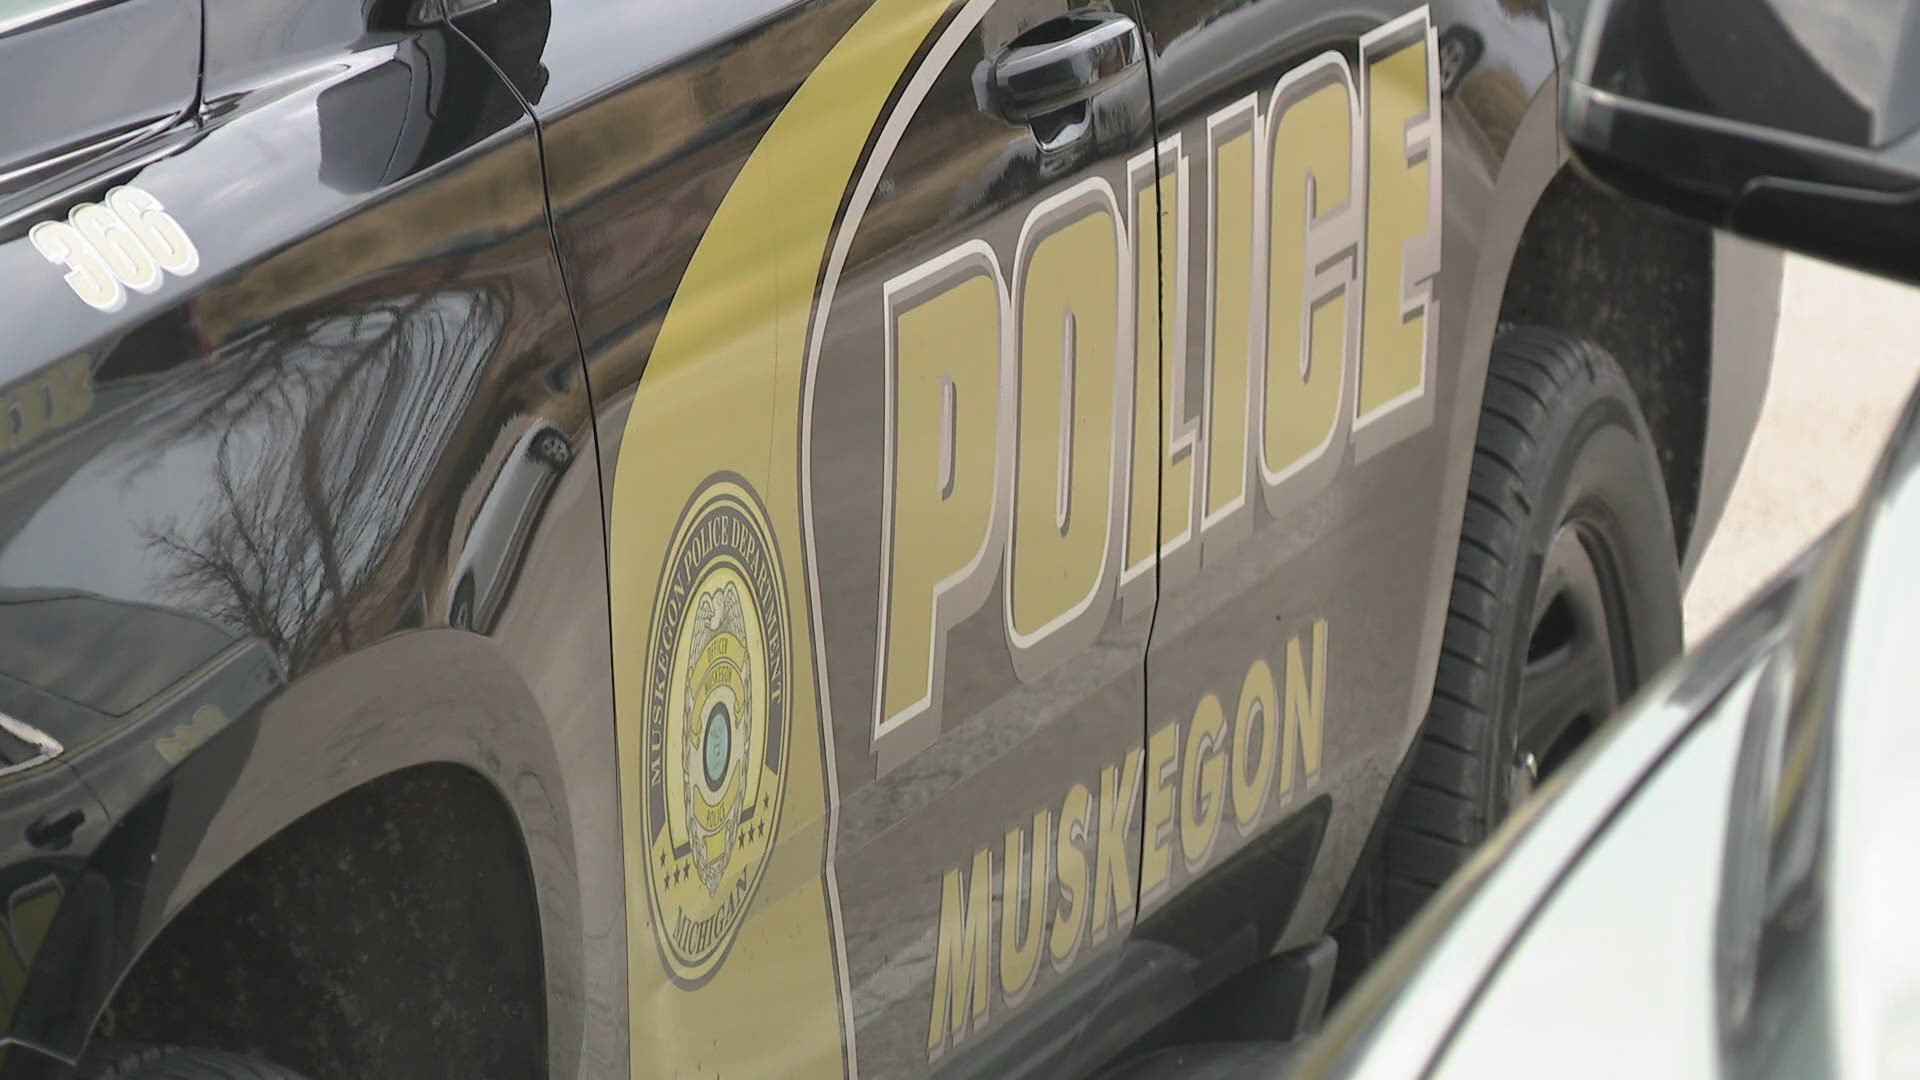 The Muskegon City Commission is spending $477,000 on technology for the police department, including body cameras and two cameras for each cruiser.